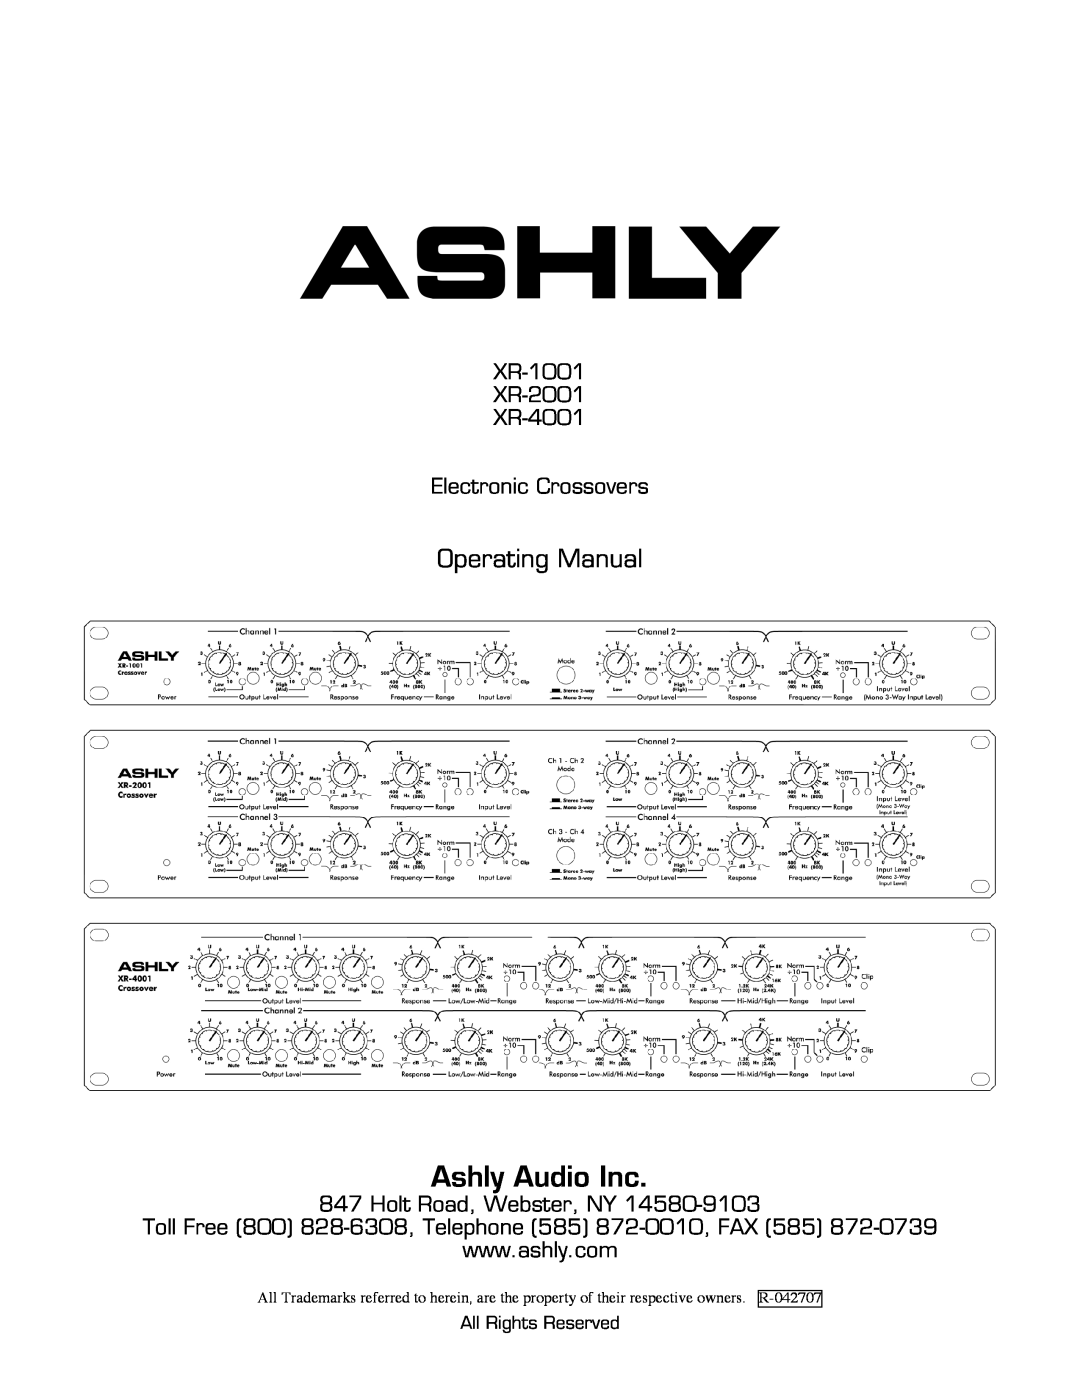 Ashly manual Operating Manual, XR-1001 XR-2001 XR-4001 Electronic Crossovers, Holt Road, Webster, NY, Ashly Audio Inc 